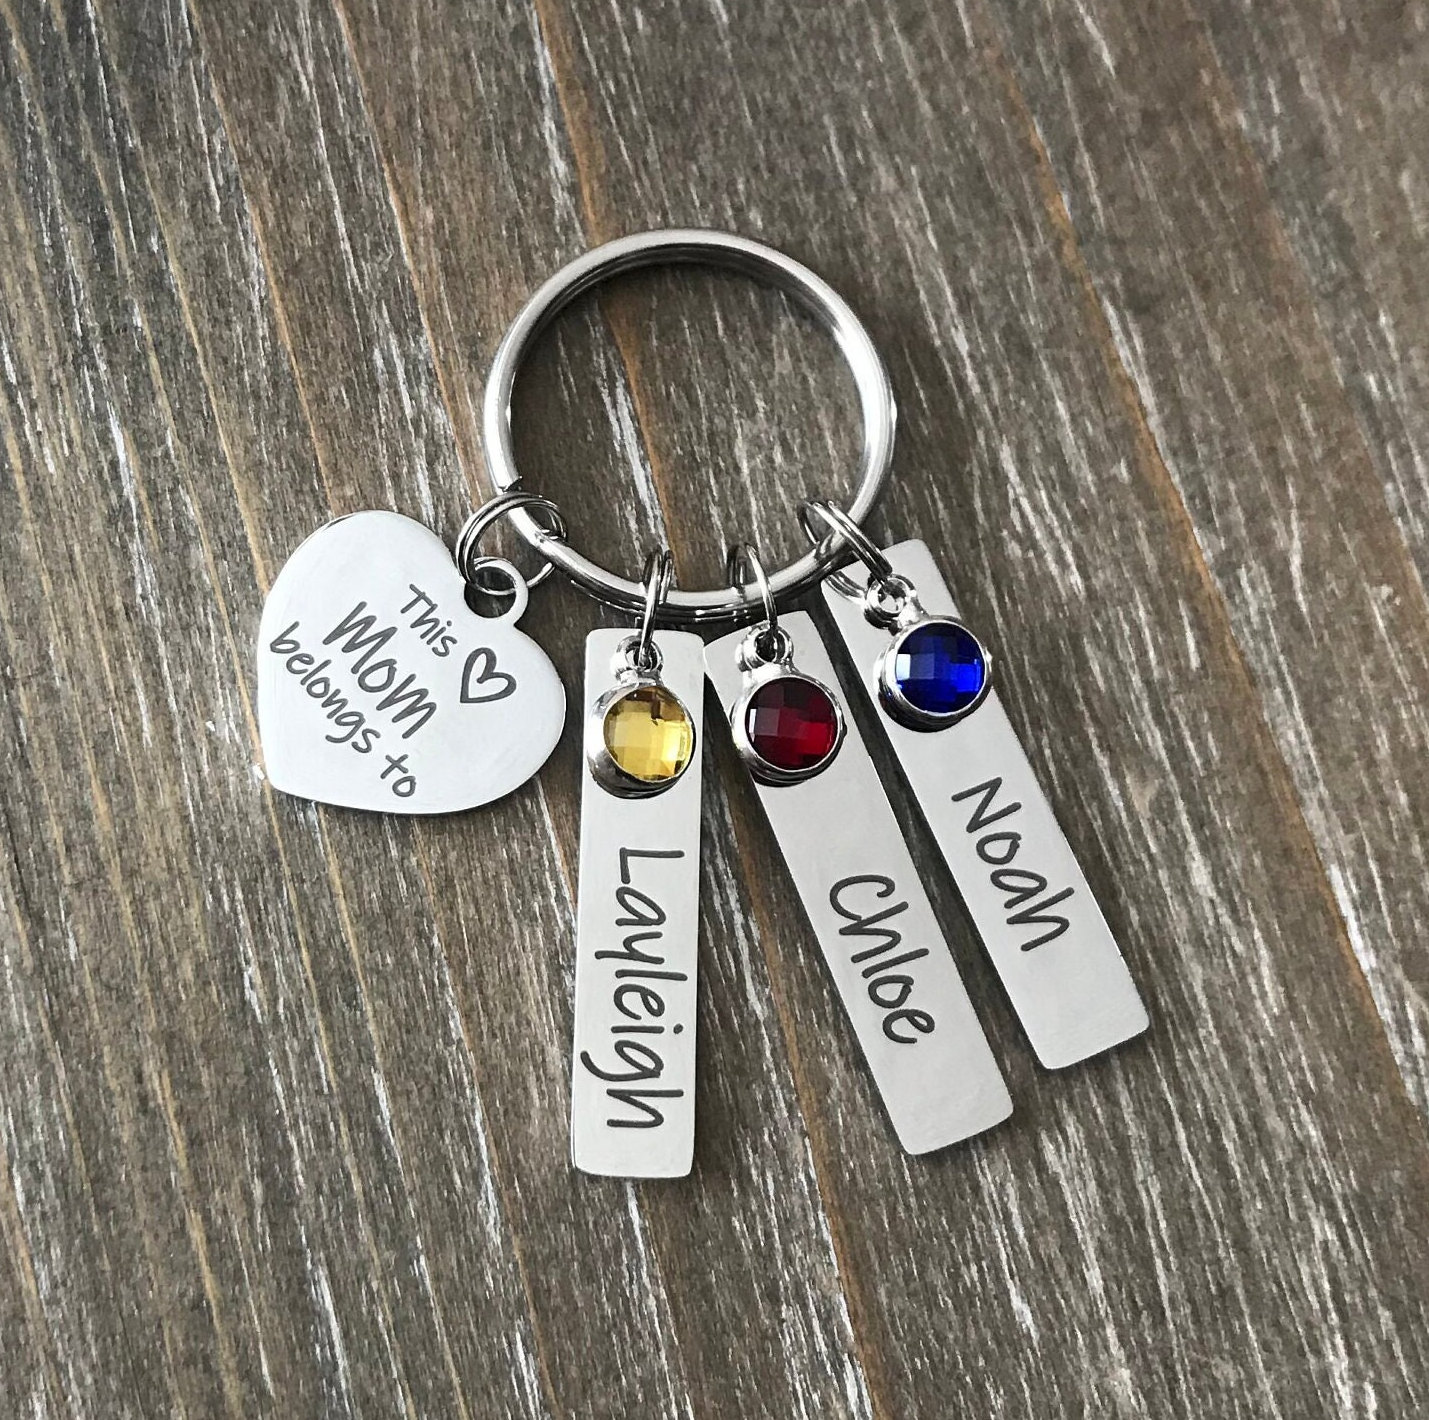 Baby Products Online - Jmimo gifts for mom son daughter keychain for mom  birthday gifts for mom best mom gifts christmas gifts for mom mom mom mom -  Kideno